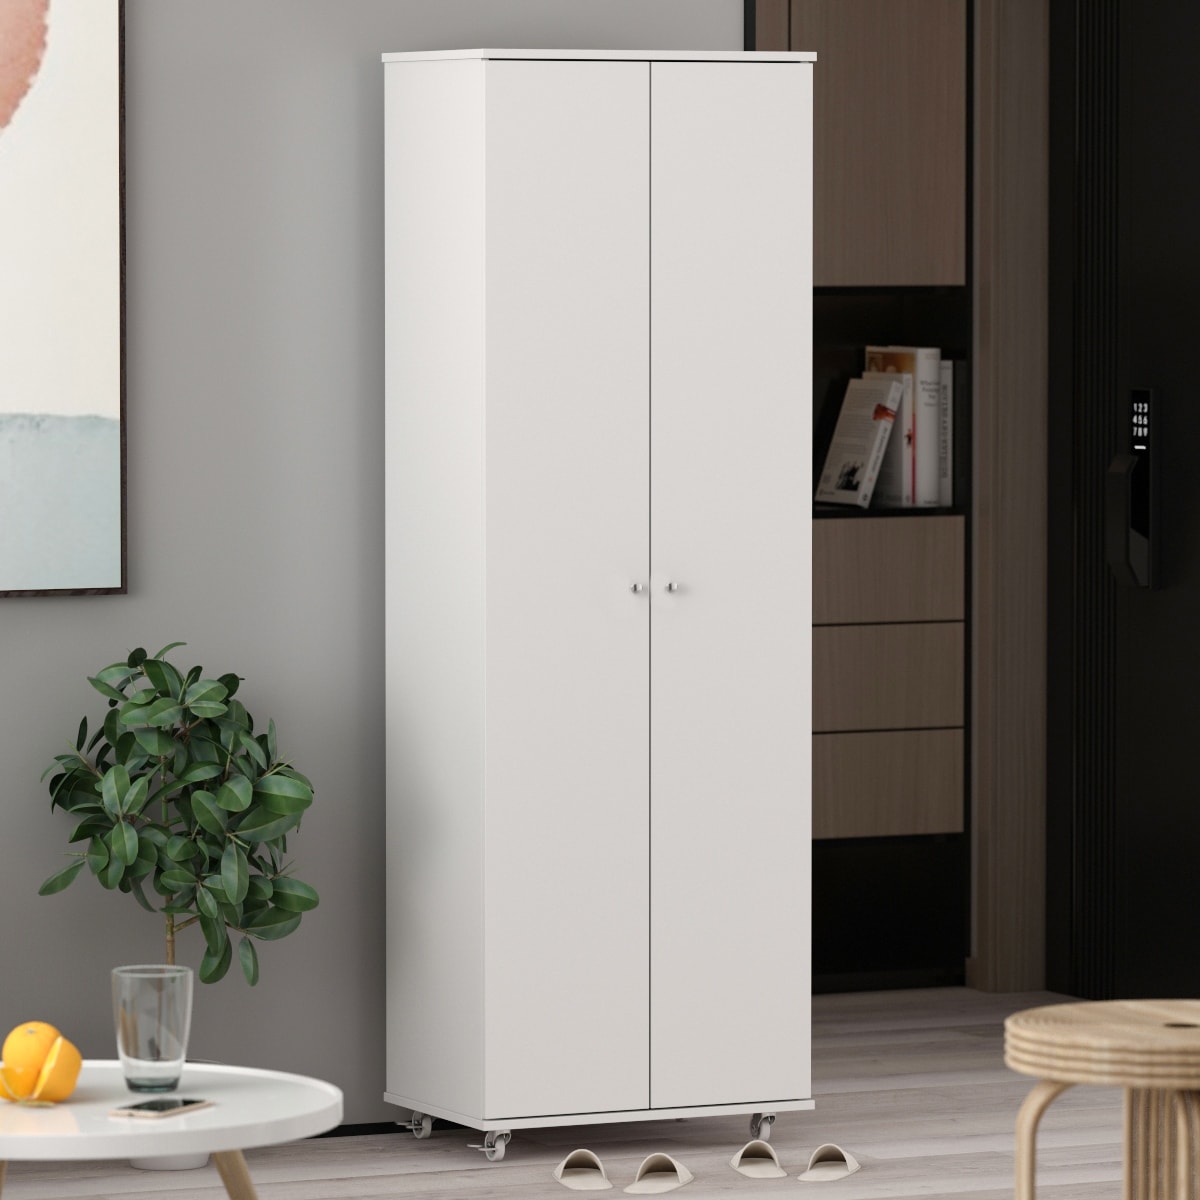 https://ak1.ostkcdn.com/images/products/is/images/direct/edccadf6634e16b522298c4f516206d0e3850ca8/FAMAPY-71%22H-Tall-Storage-Cabinet%2C-8-Tier-Shoe-Rack-with-Wheels.jpg